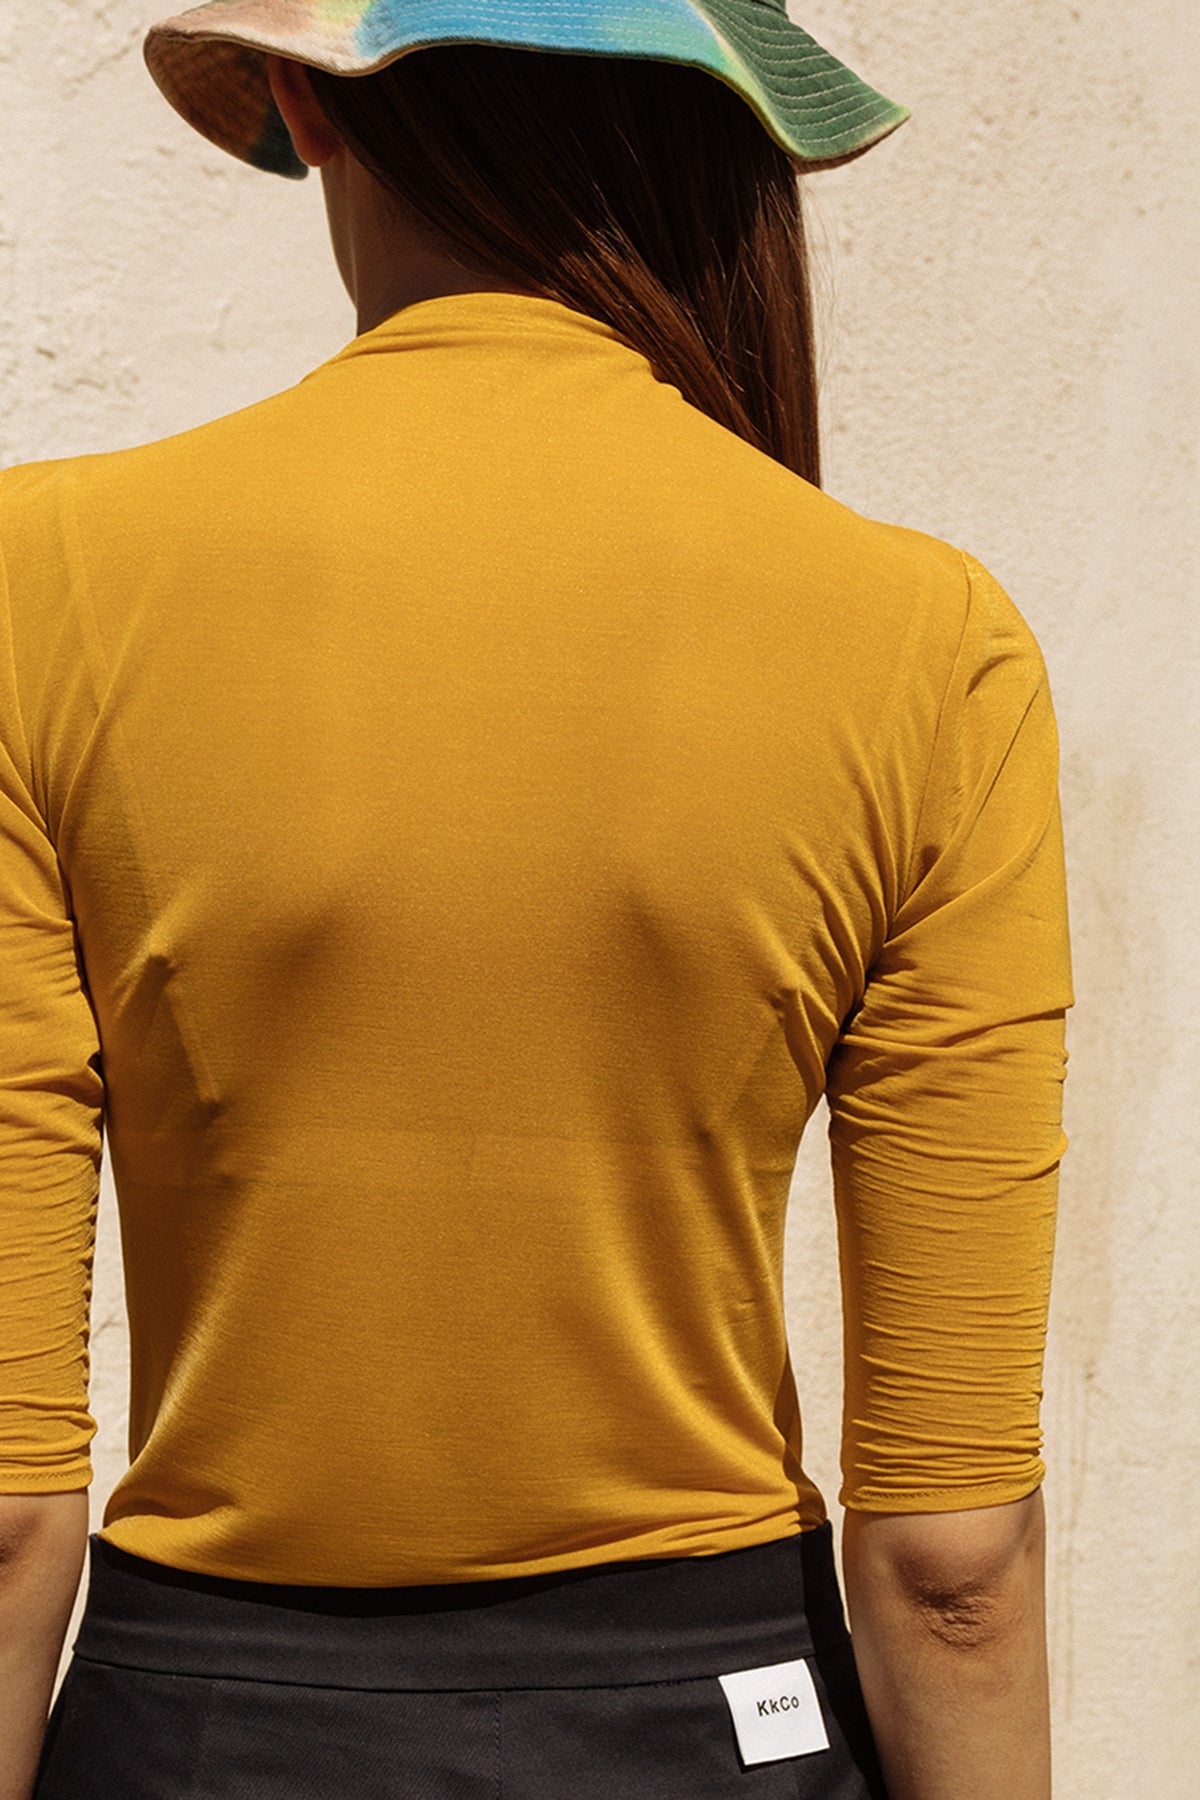 Transparent Knit in Mustard